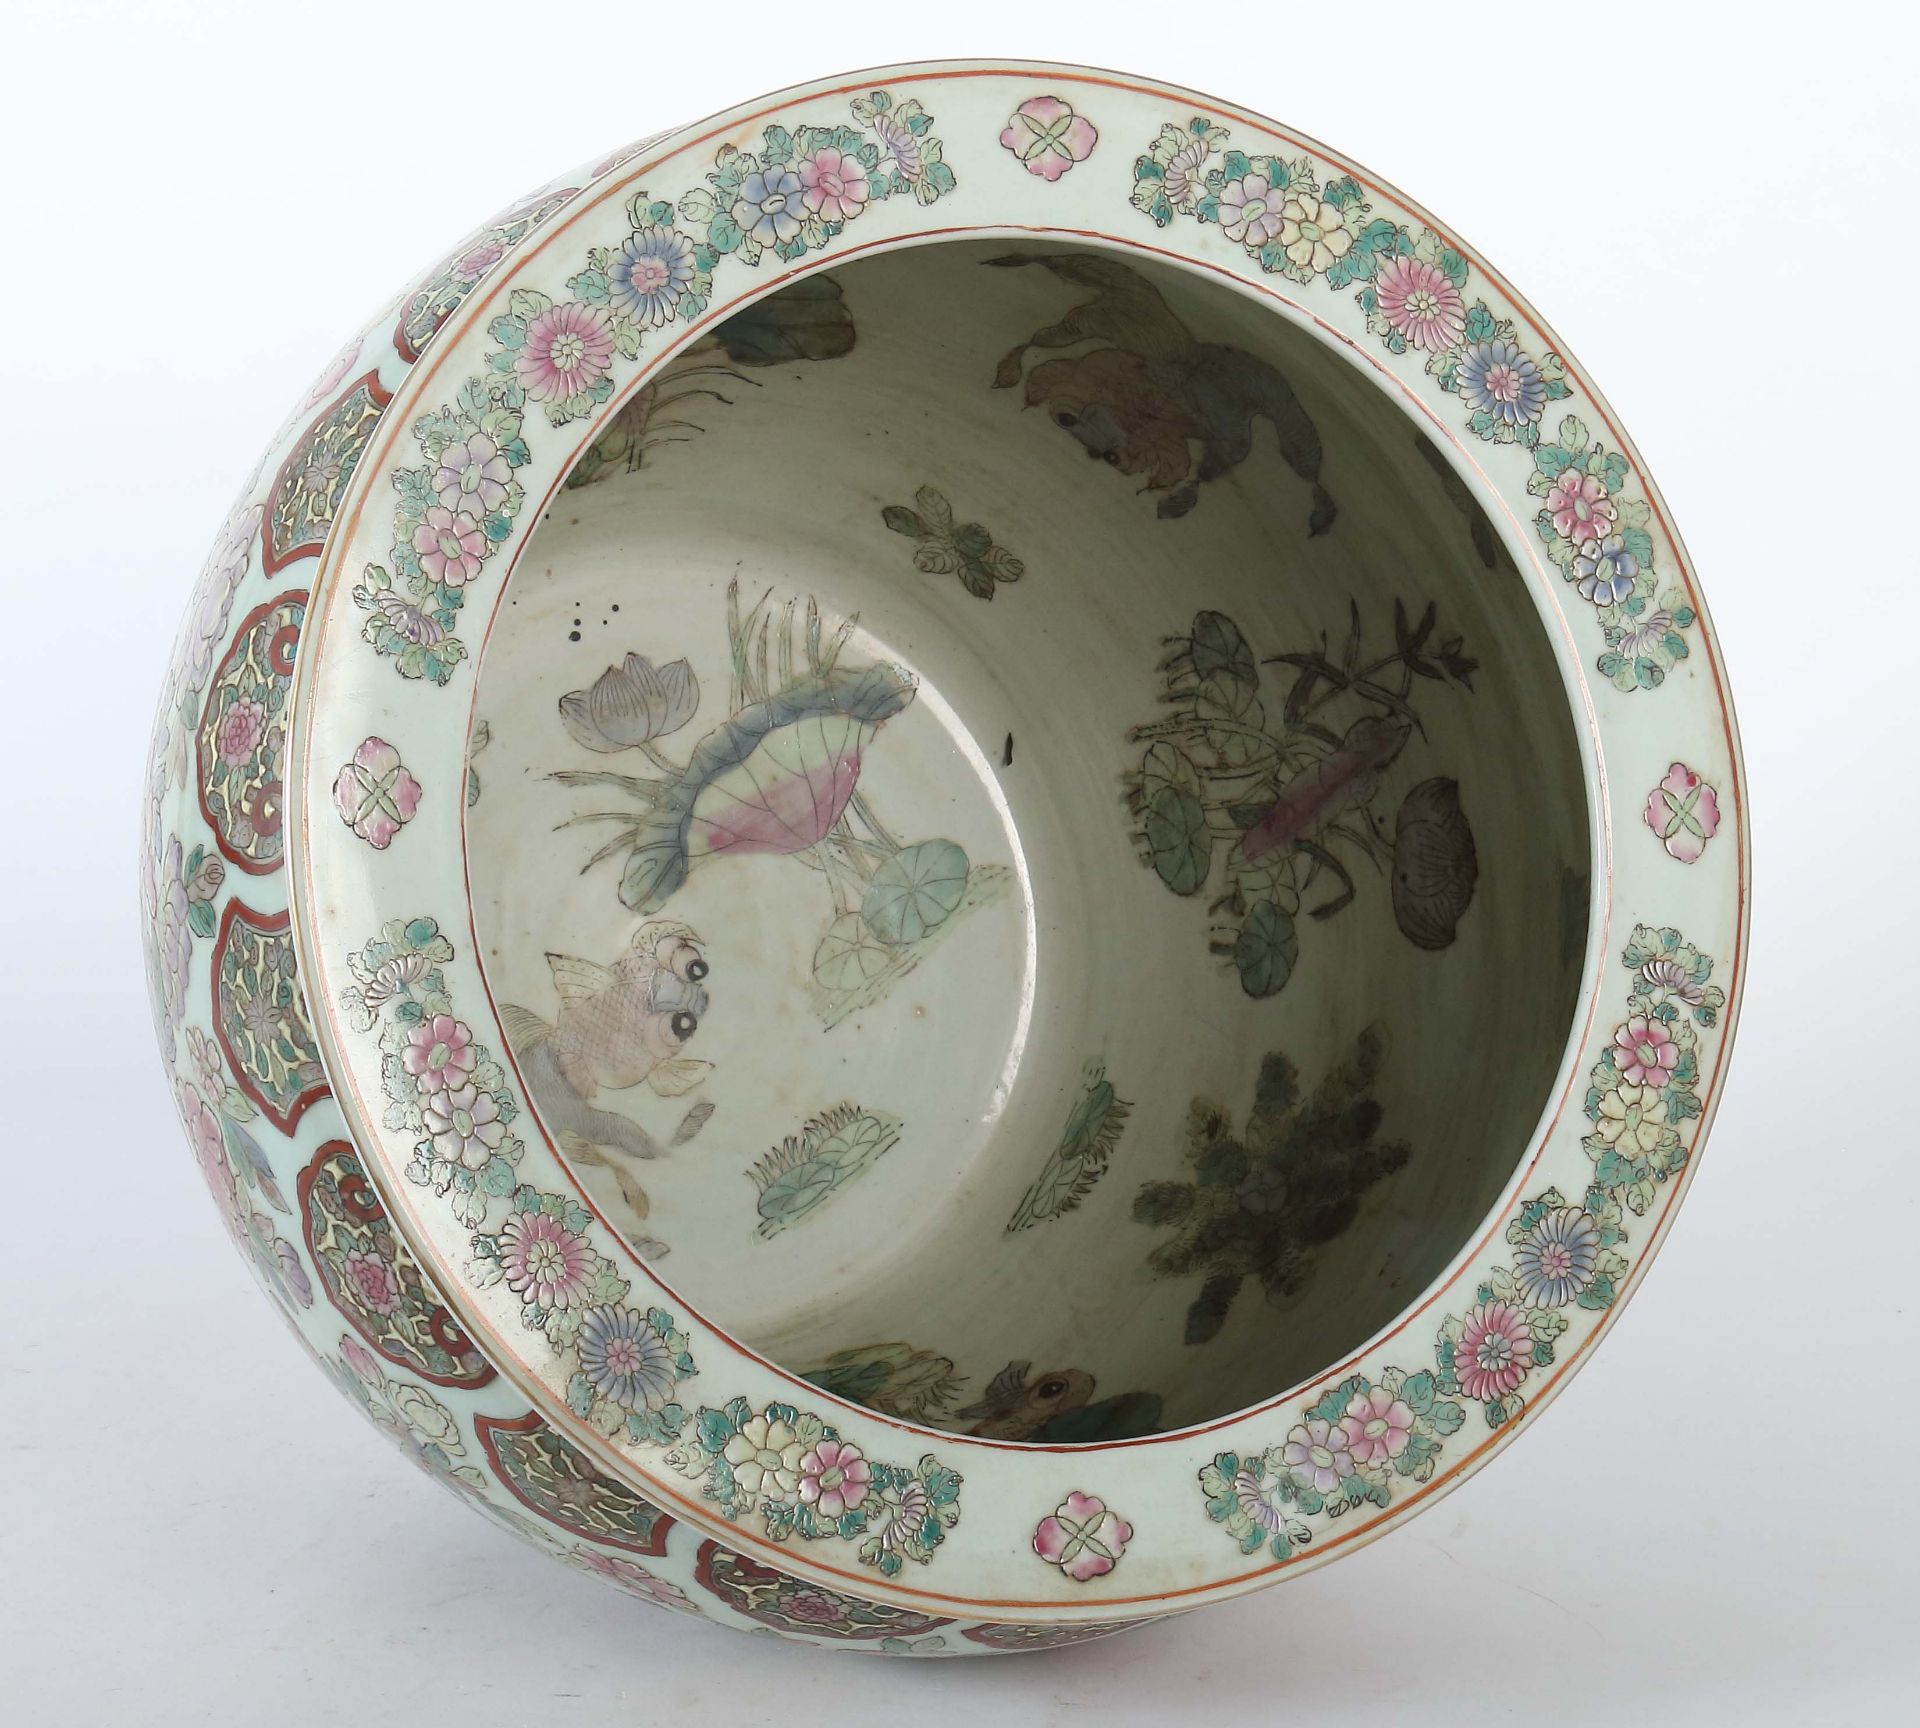 Großer Cachepot China, wohl 19. Jh., - Image 3 of 5